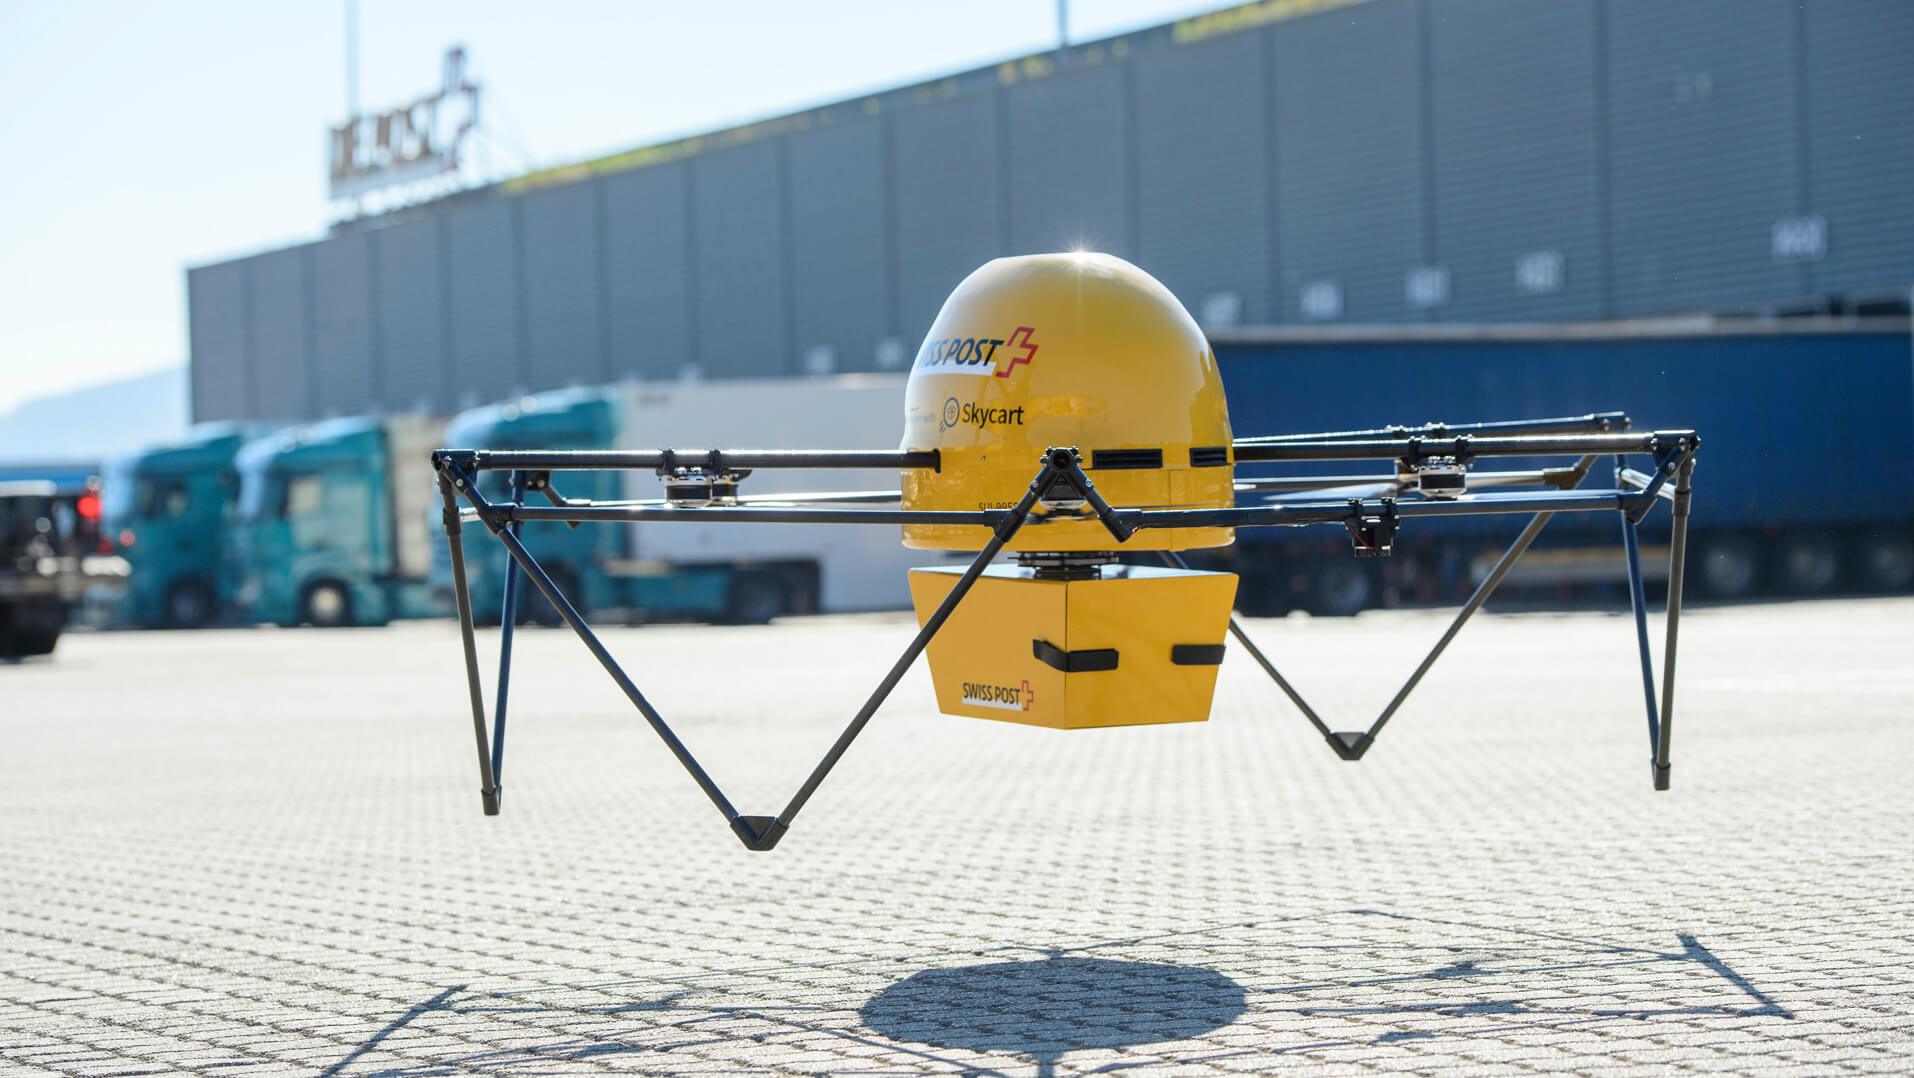 Swiss Post to start delivering with drones this summer